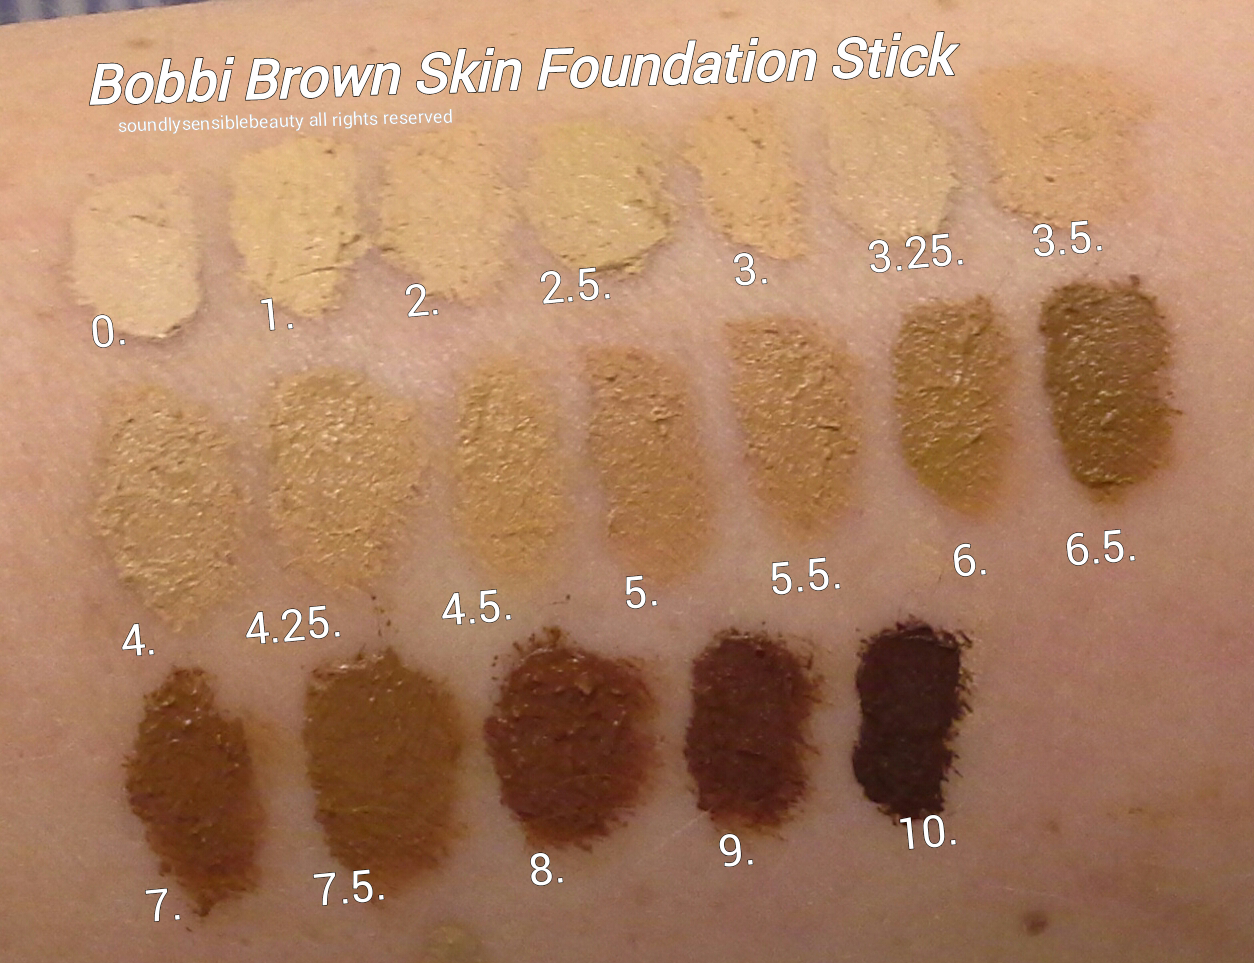 Bobbi Brown Skin Foundation Stick; Review & Swatches of Shades